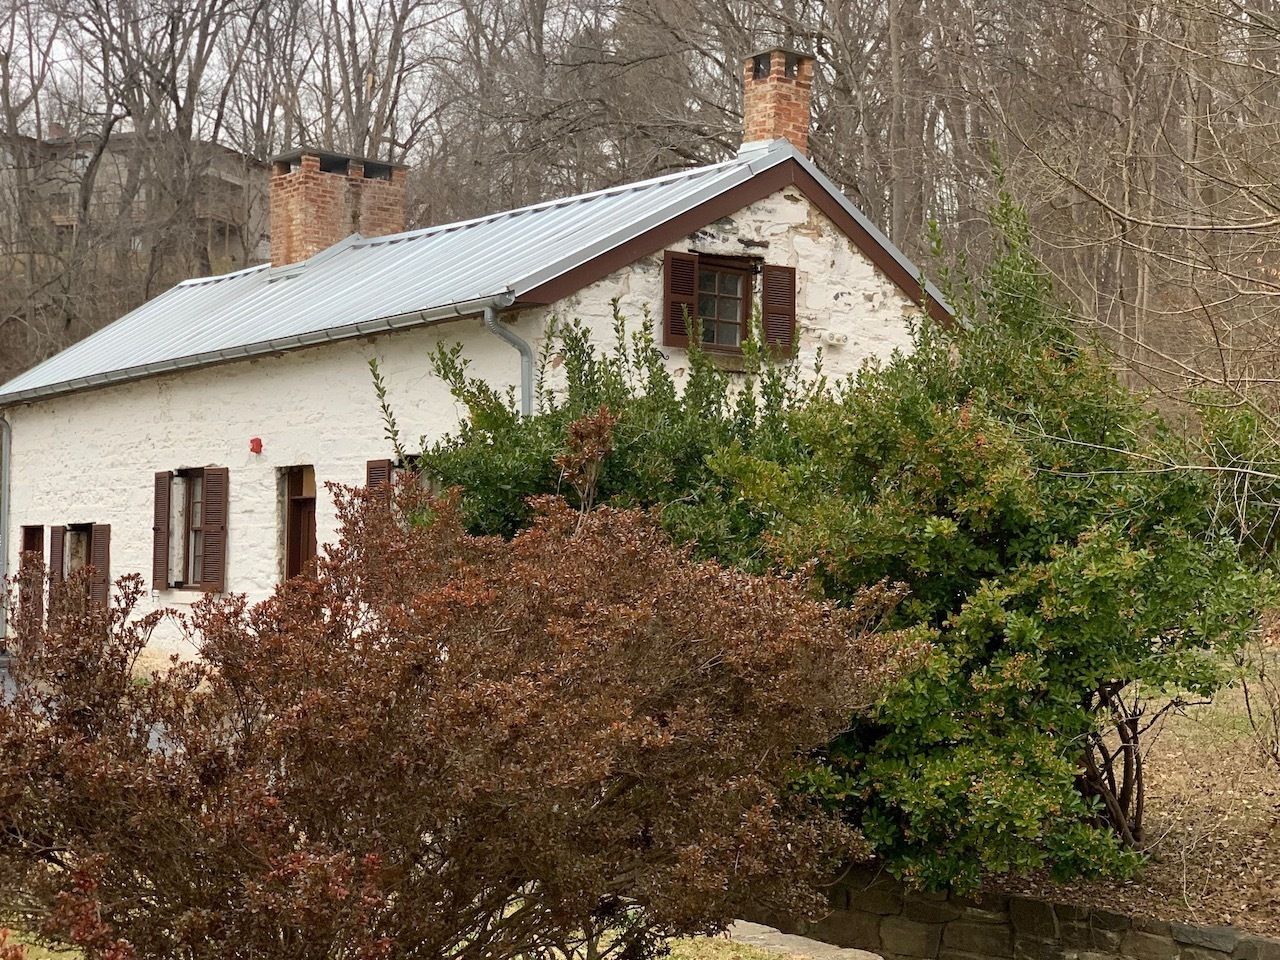 the swains, a C&O canal lockhouse available to rent 